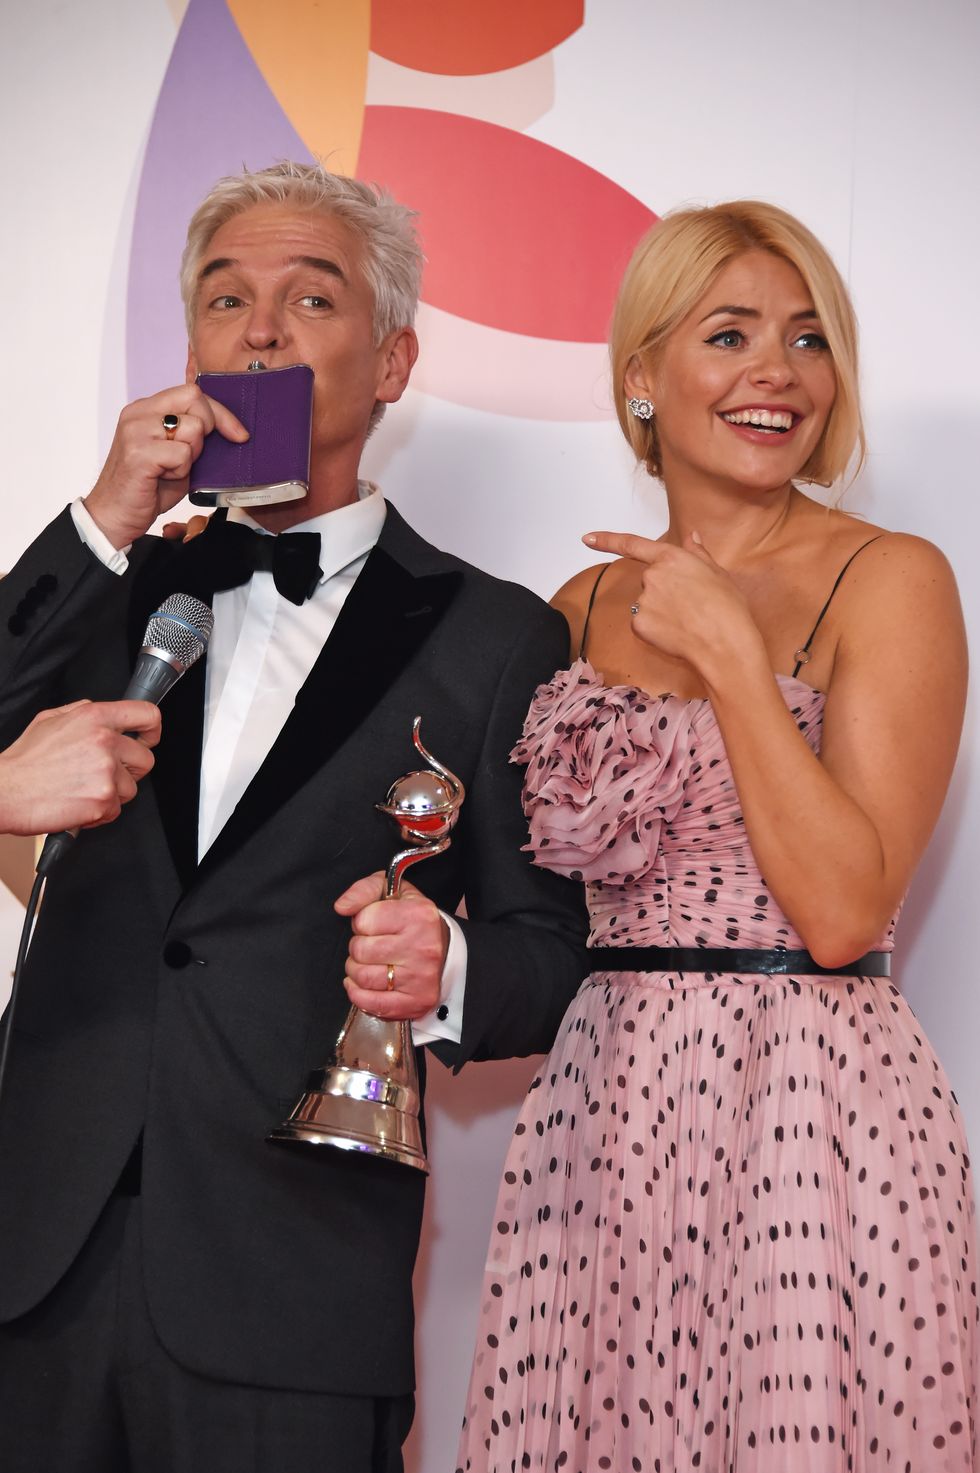 Phillip Schofield and Holly Willoughby drank from a hipflask backstage at the NTAs